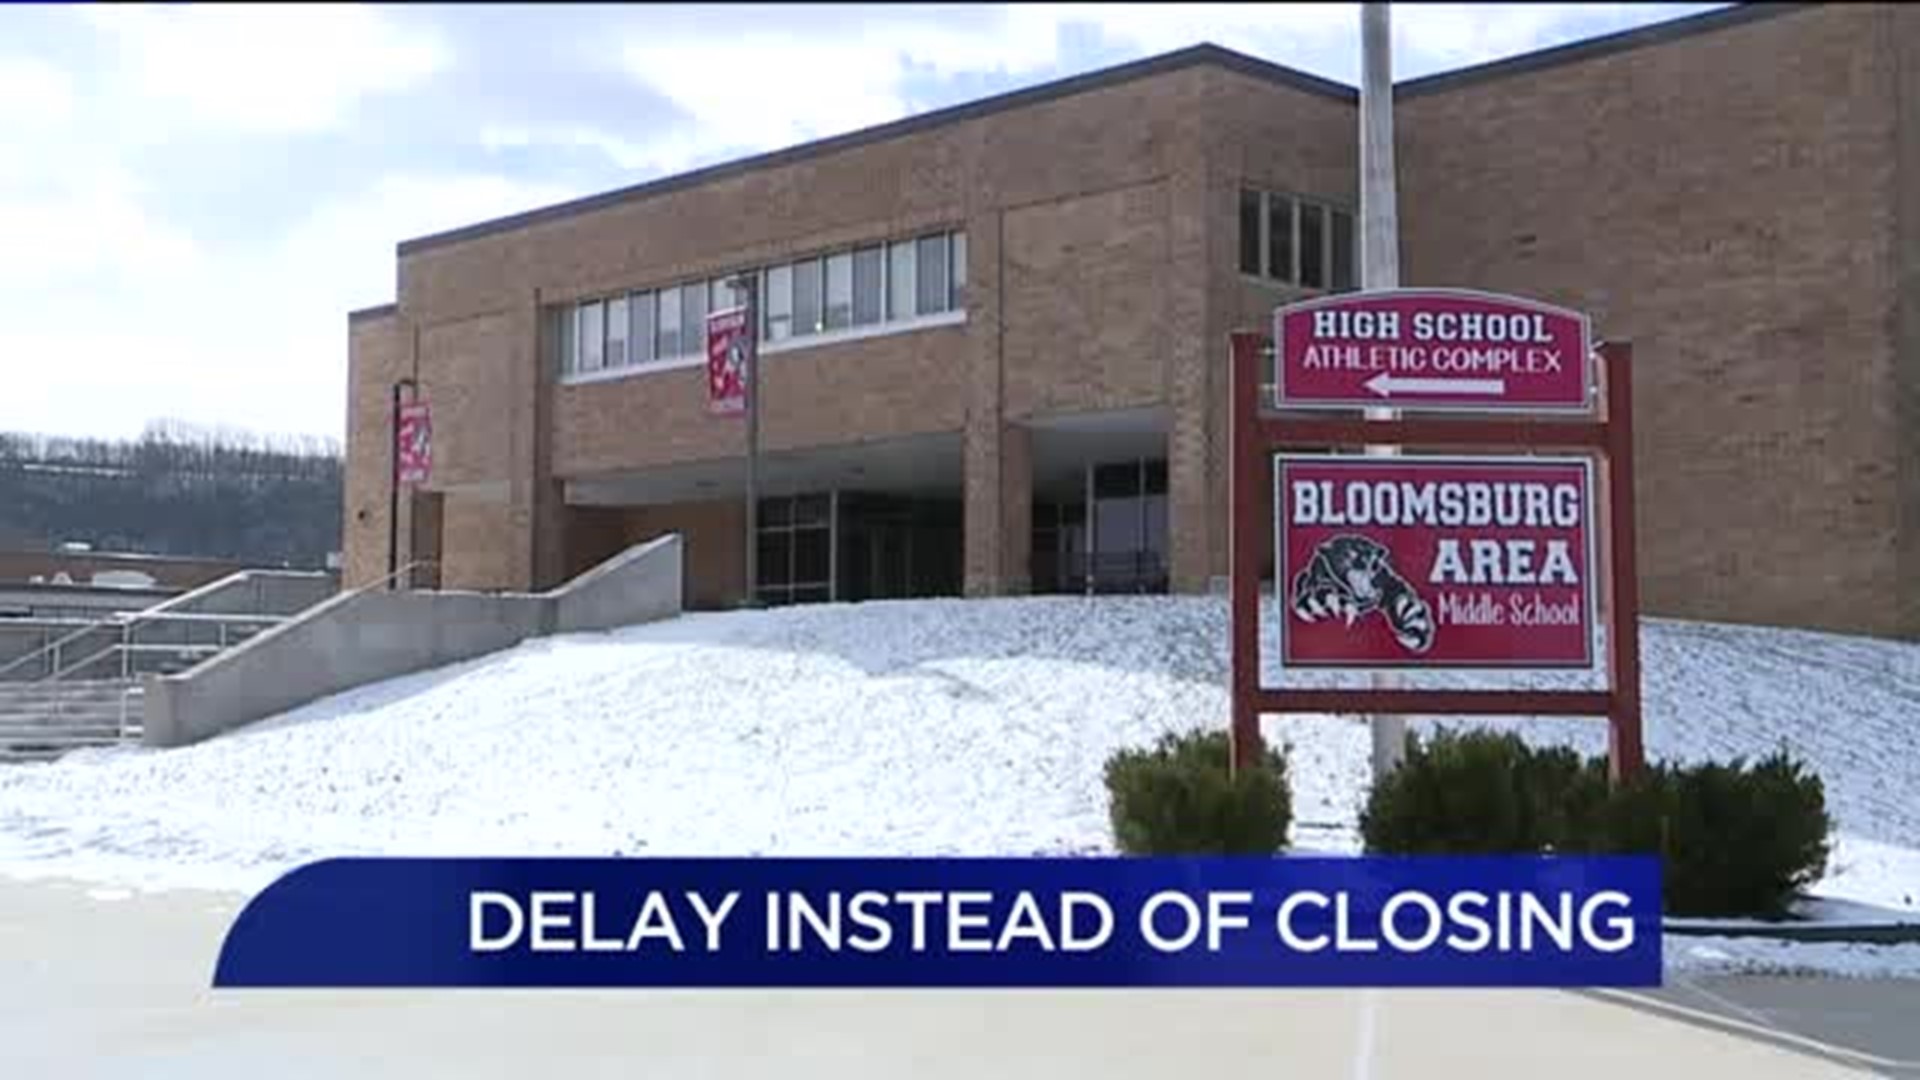 Despite Cold, Bloomsburg Area School District Remains Opens To Help Students Stay Warm